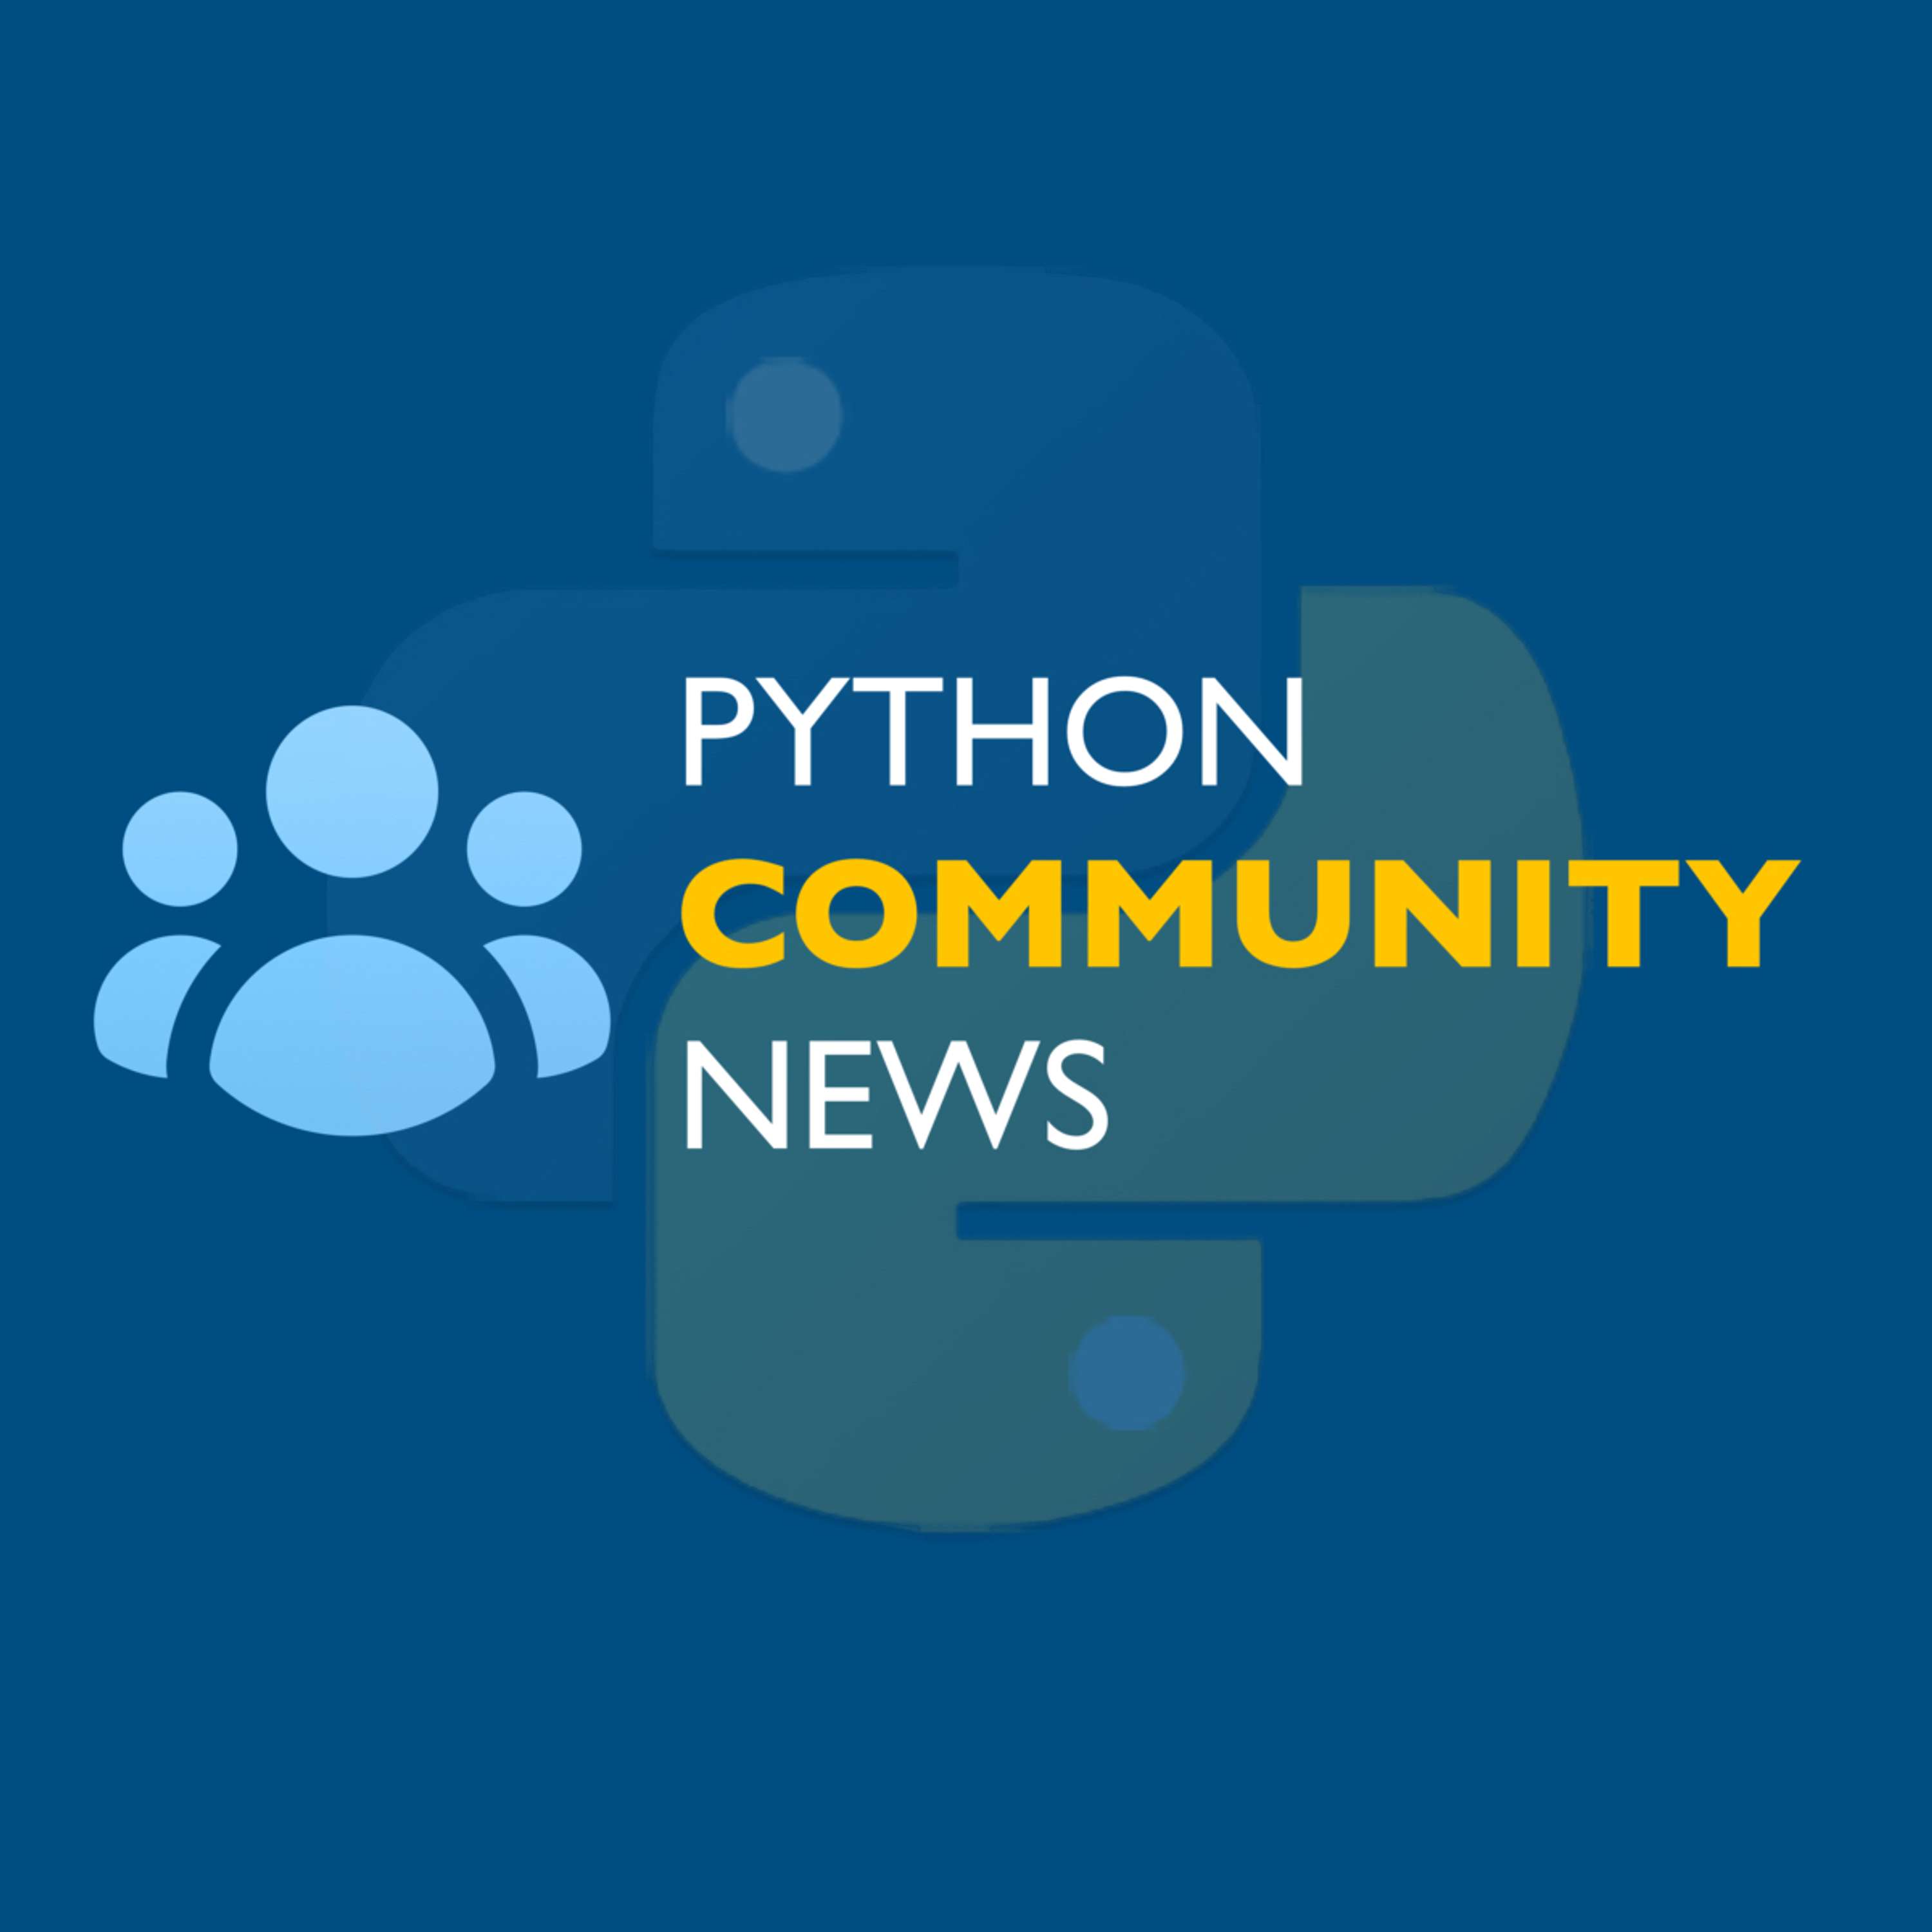 Future Versions of Python, Foundation Appointments, and Open Election Models - PCN 23 Sep 2022